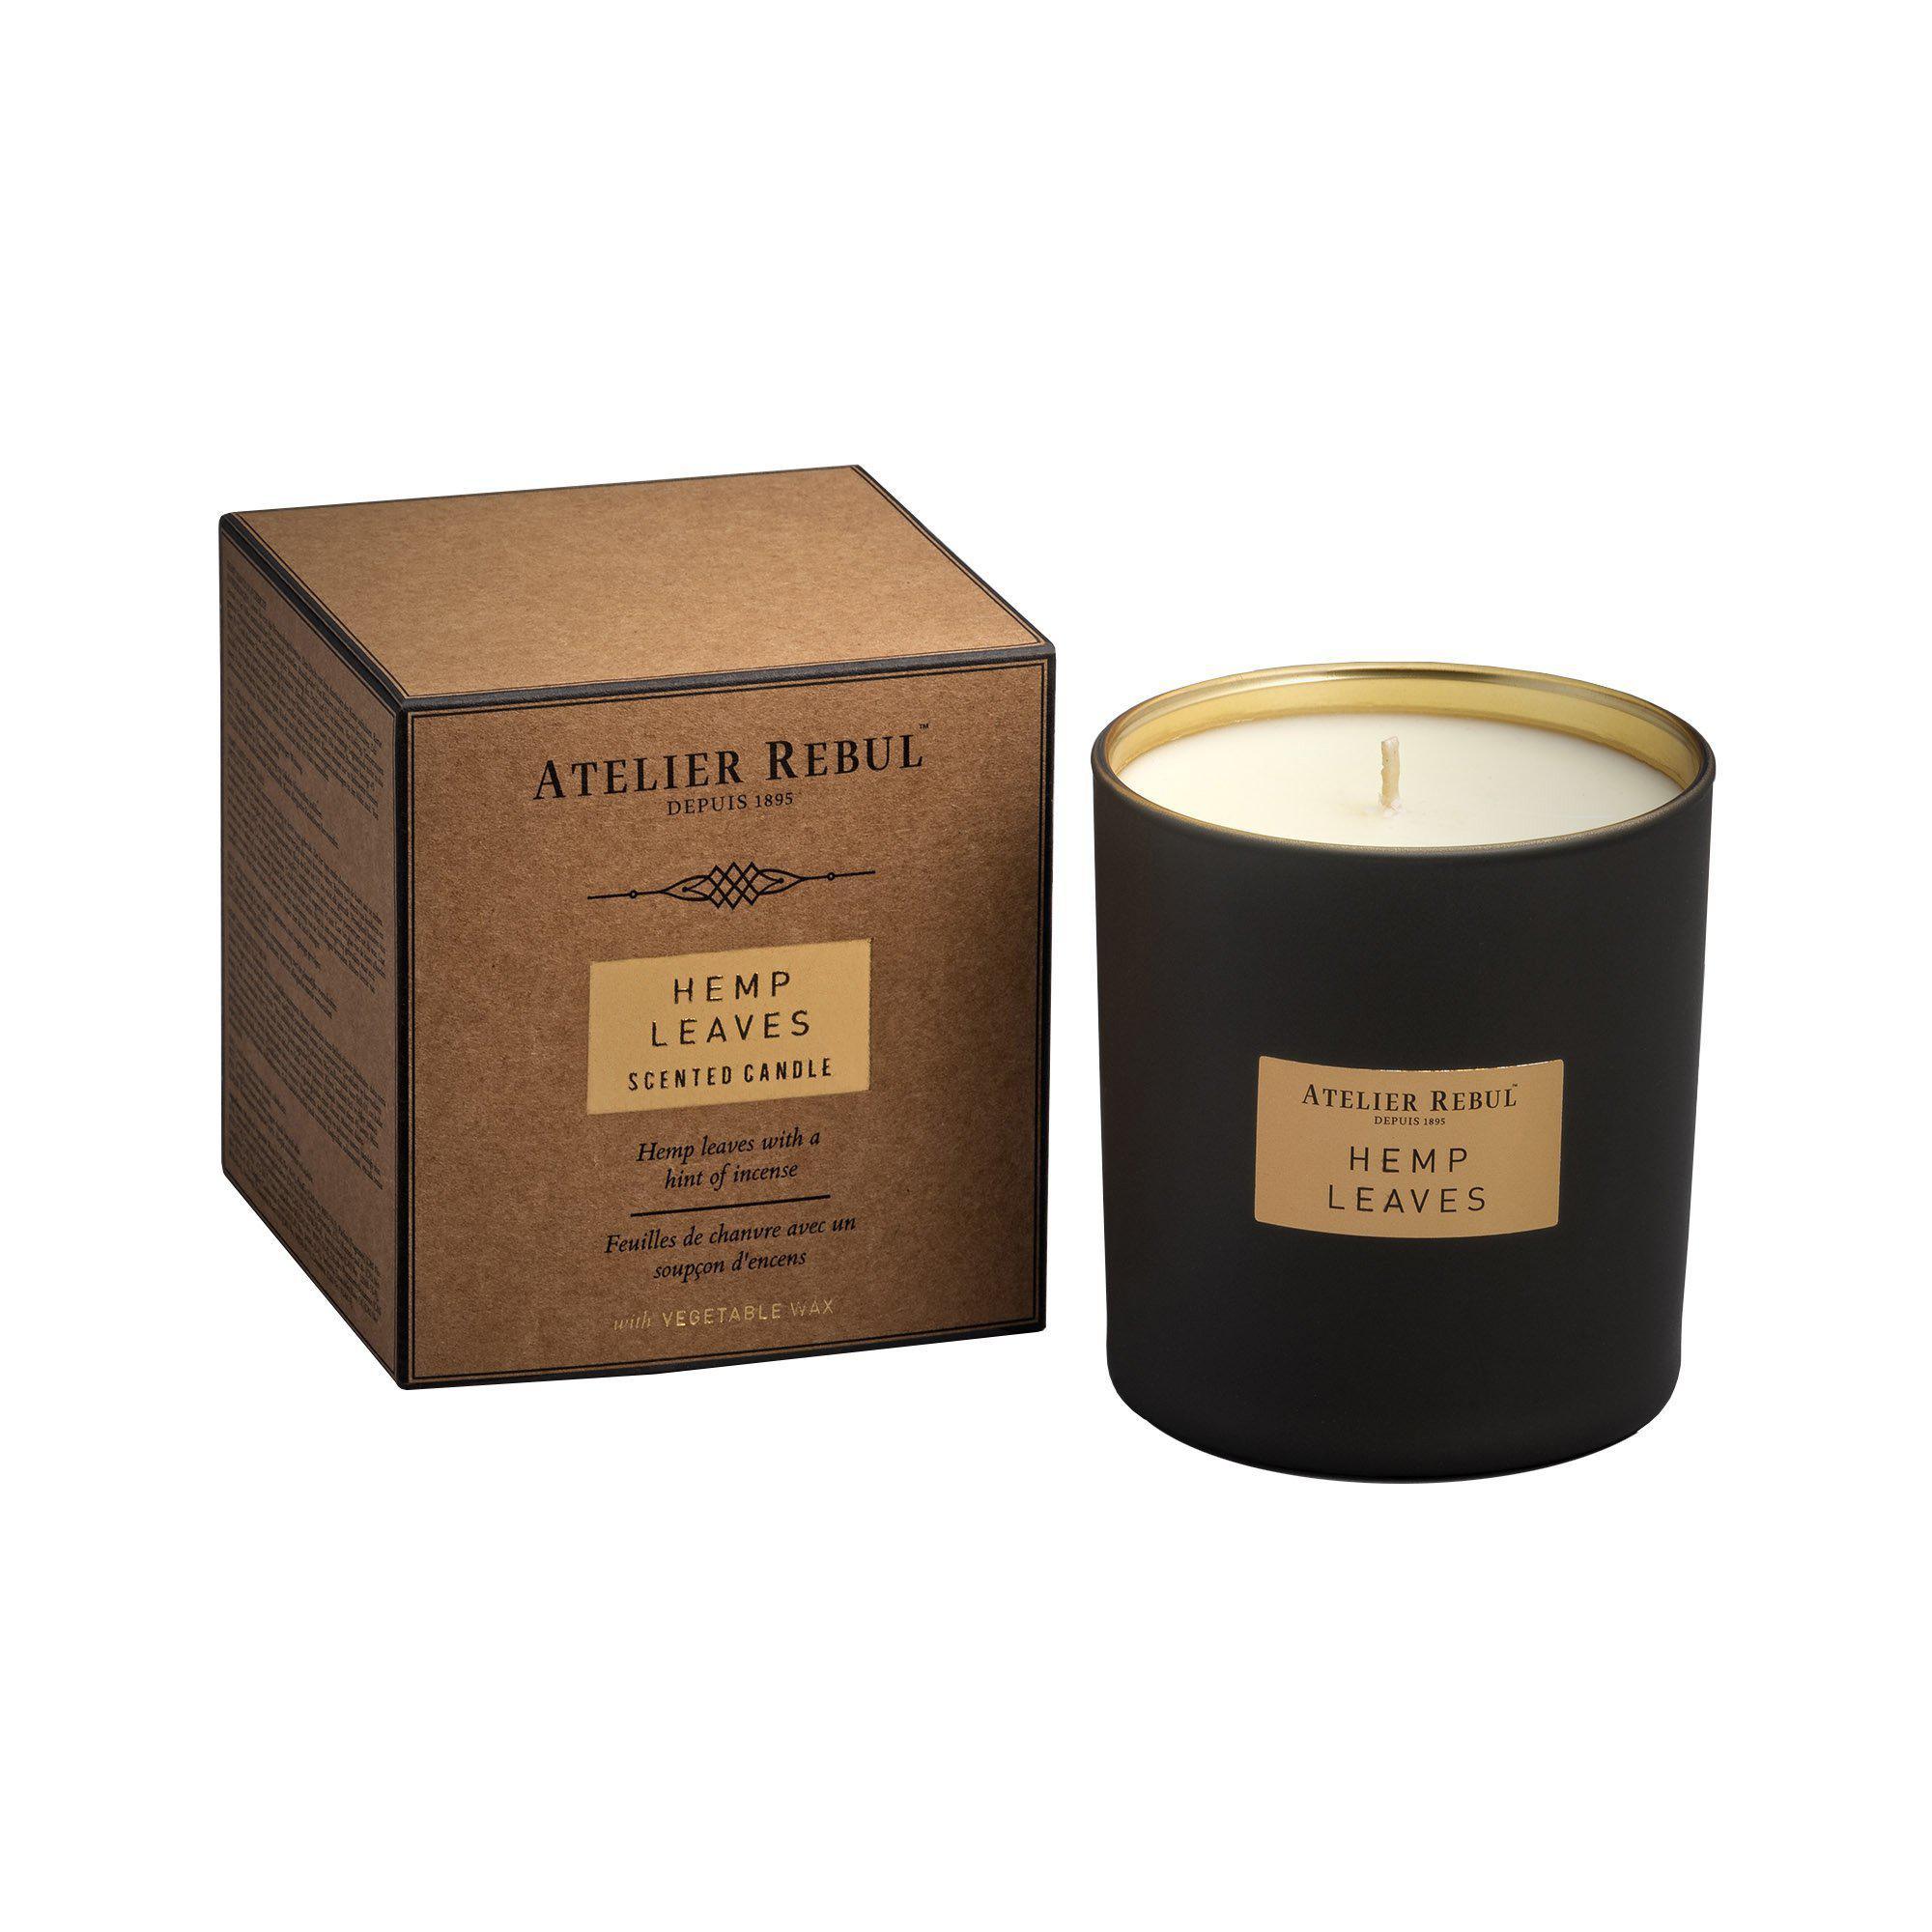 Hemp Leaves Scented Candle 210g | Atelier Rebul Webshop